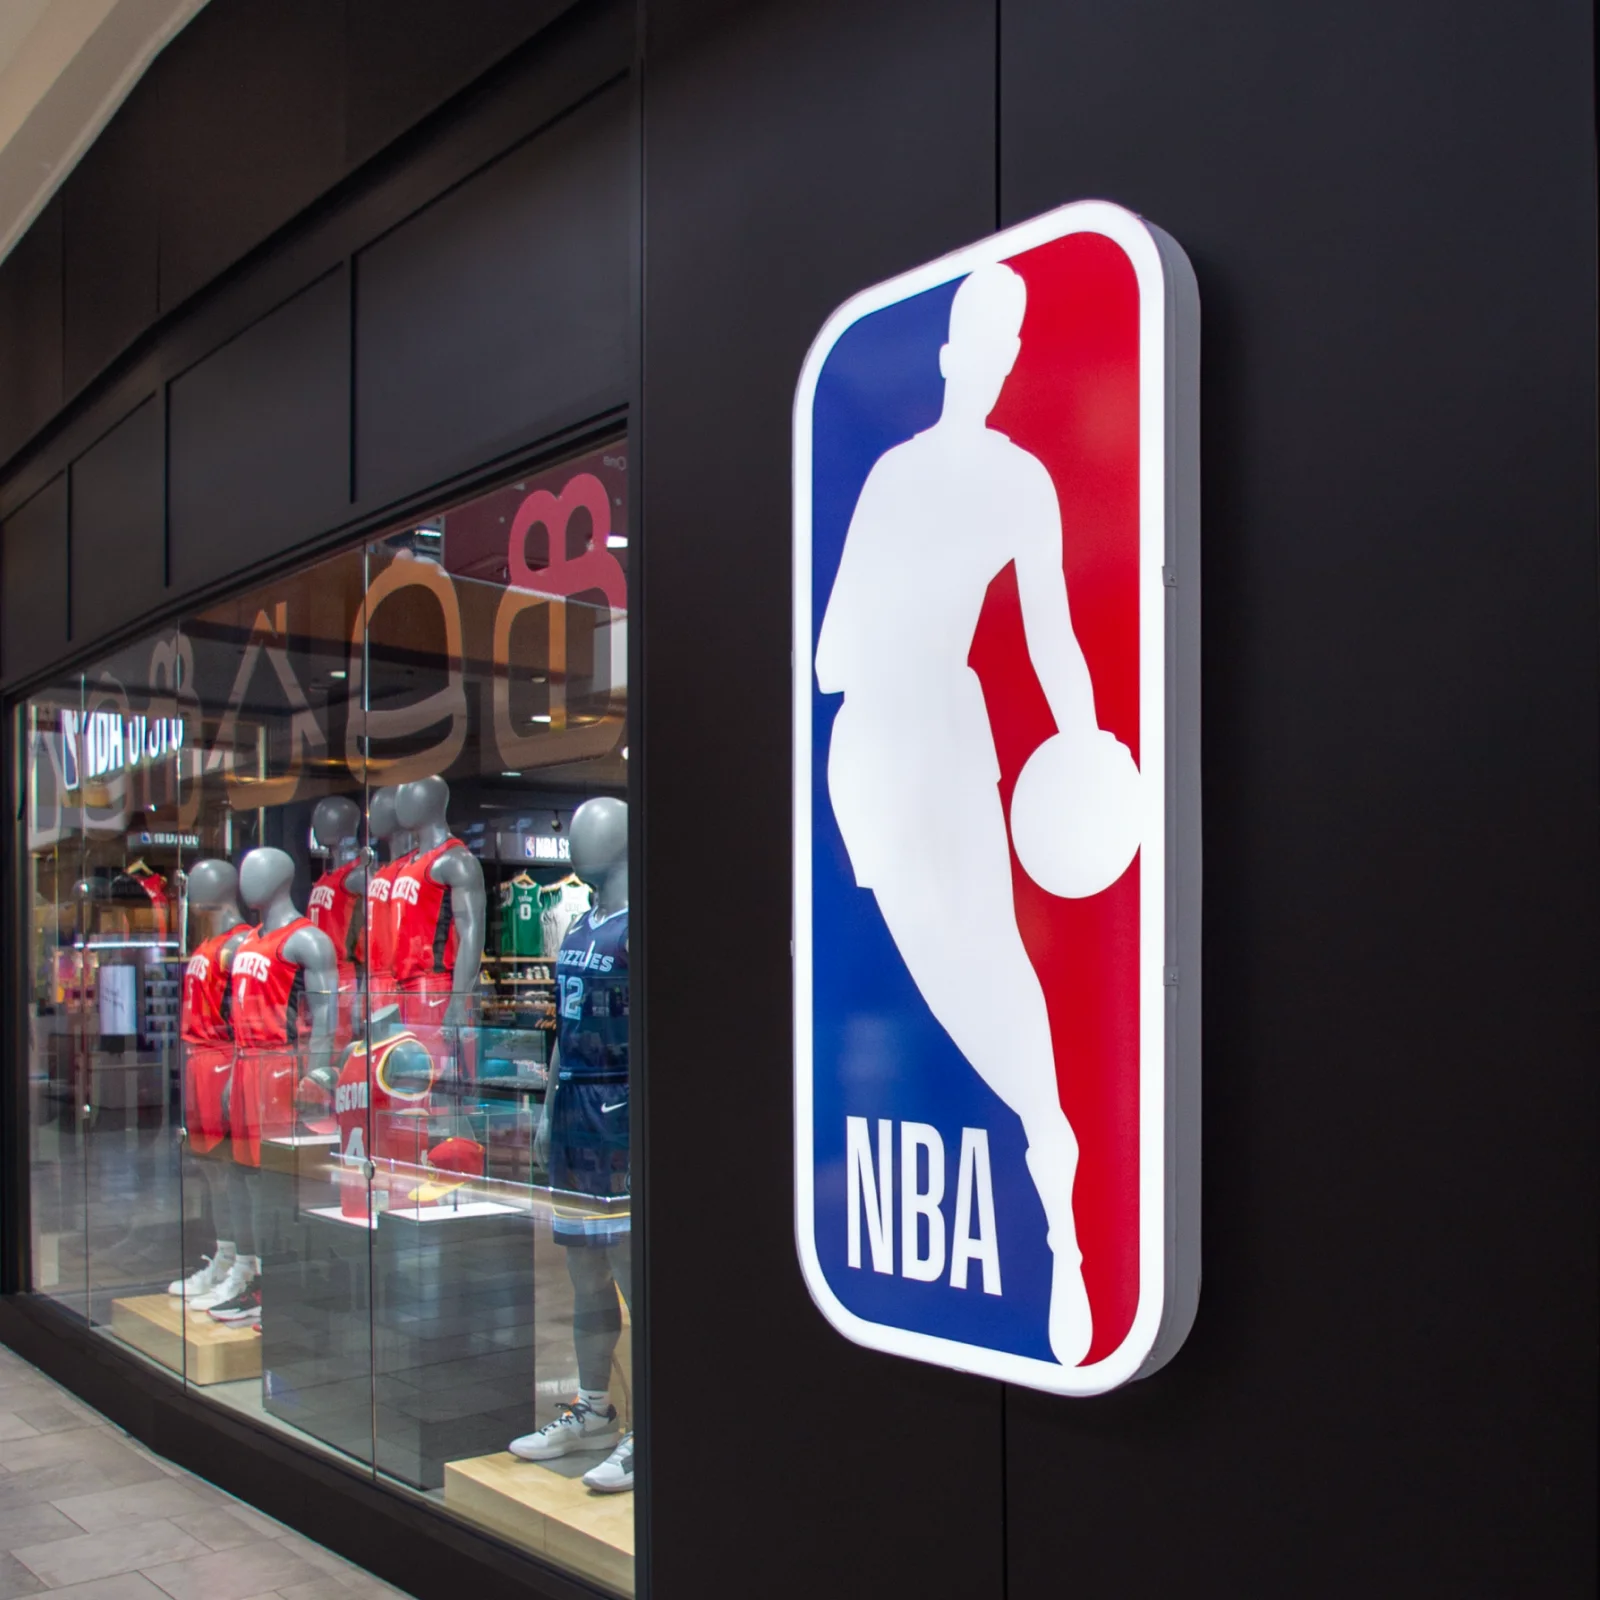 Exterior detail of the NBA flagship store's logo